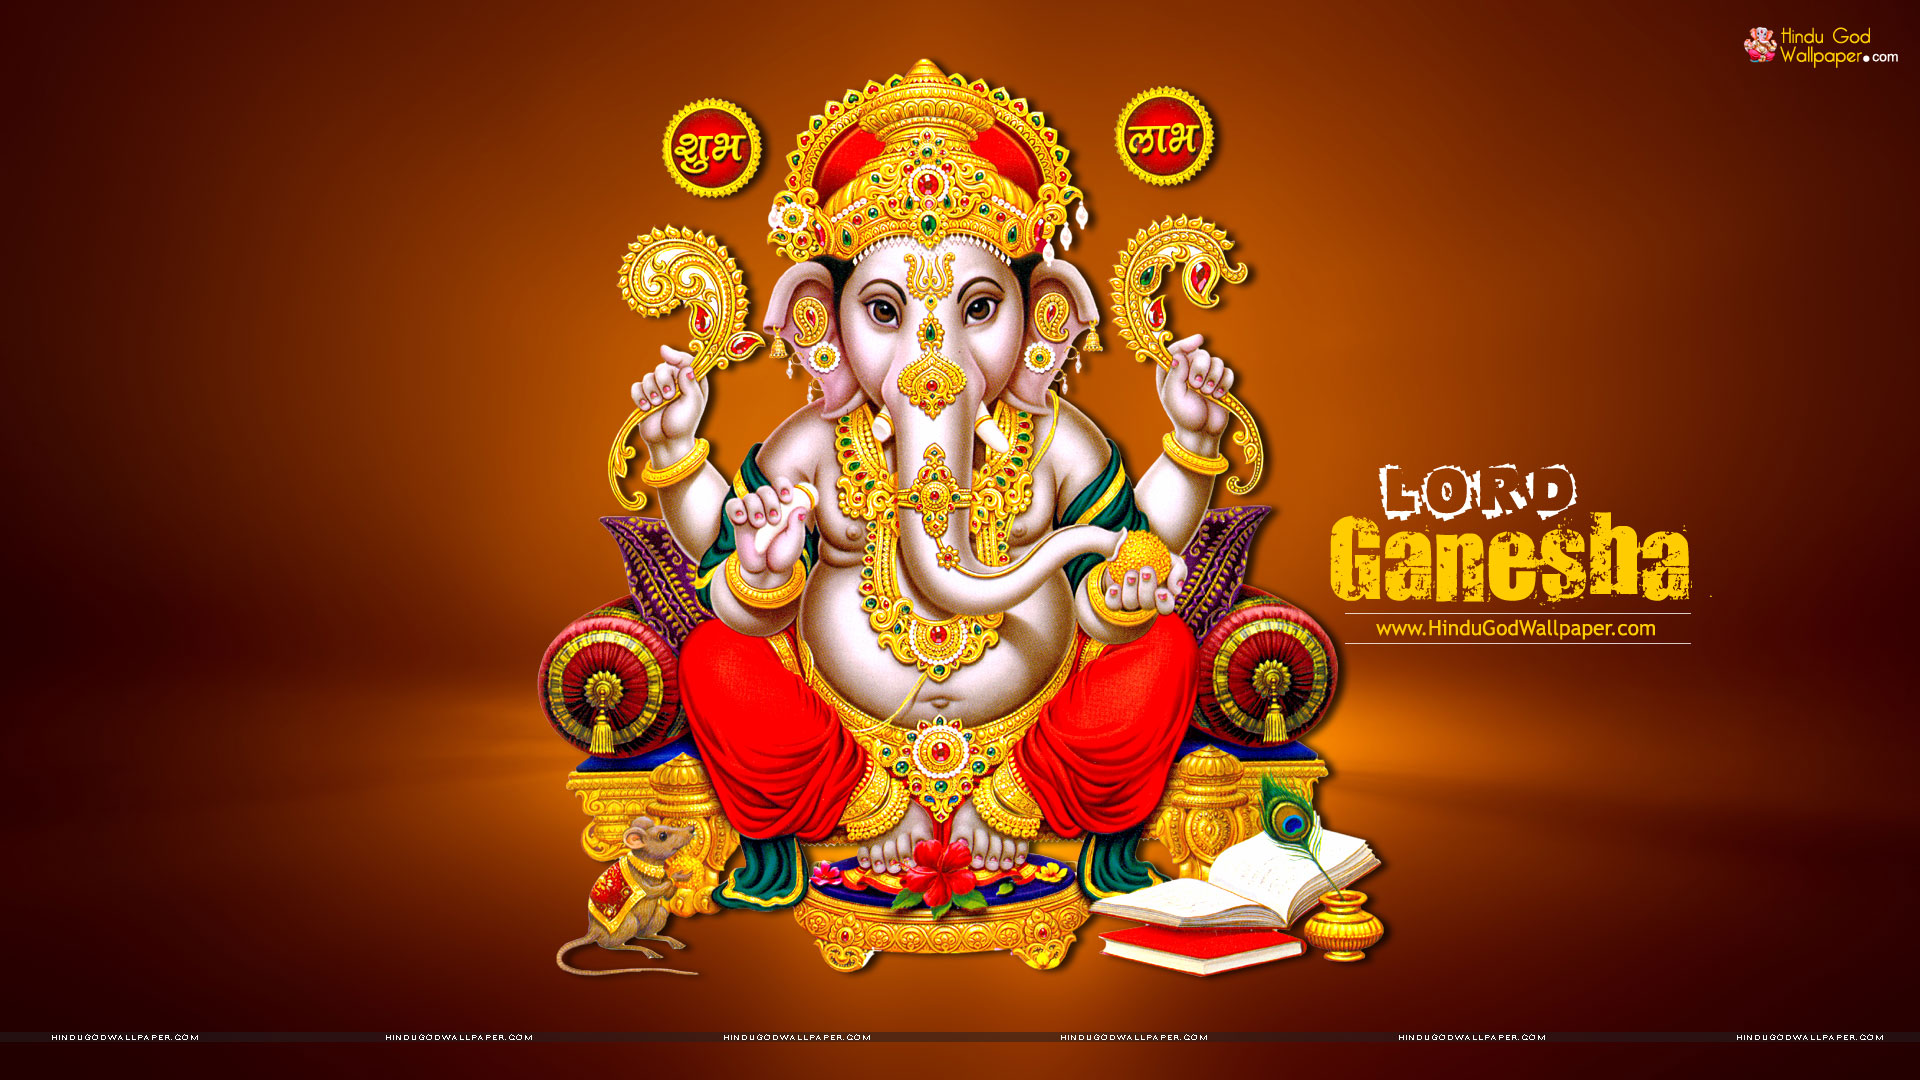 Lord Ganesha Images, Wallpapers, Pics for Whatsapp DP Download